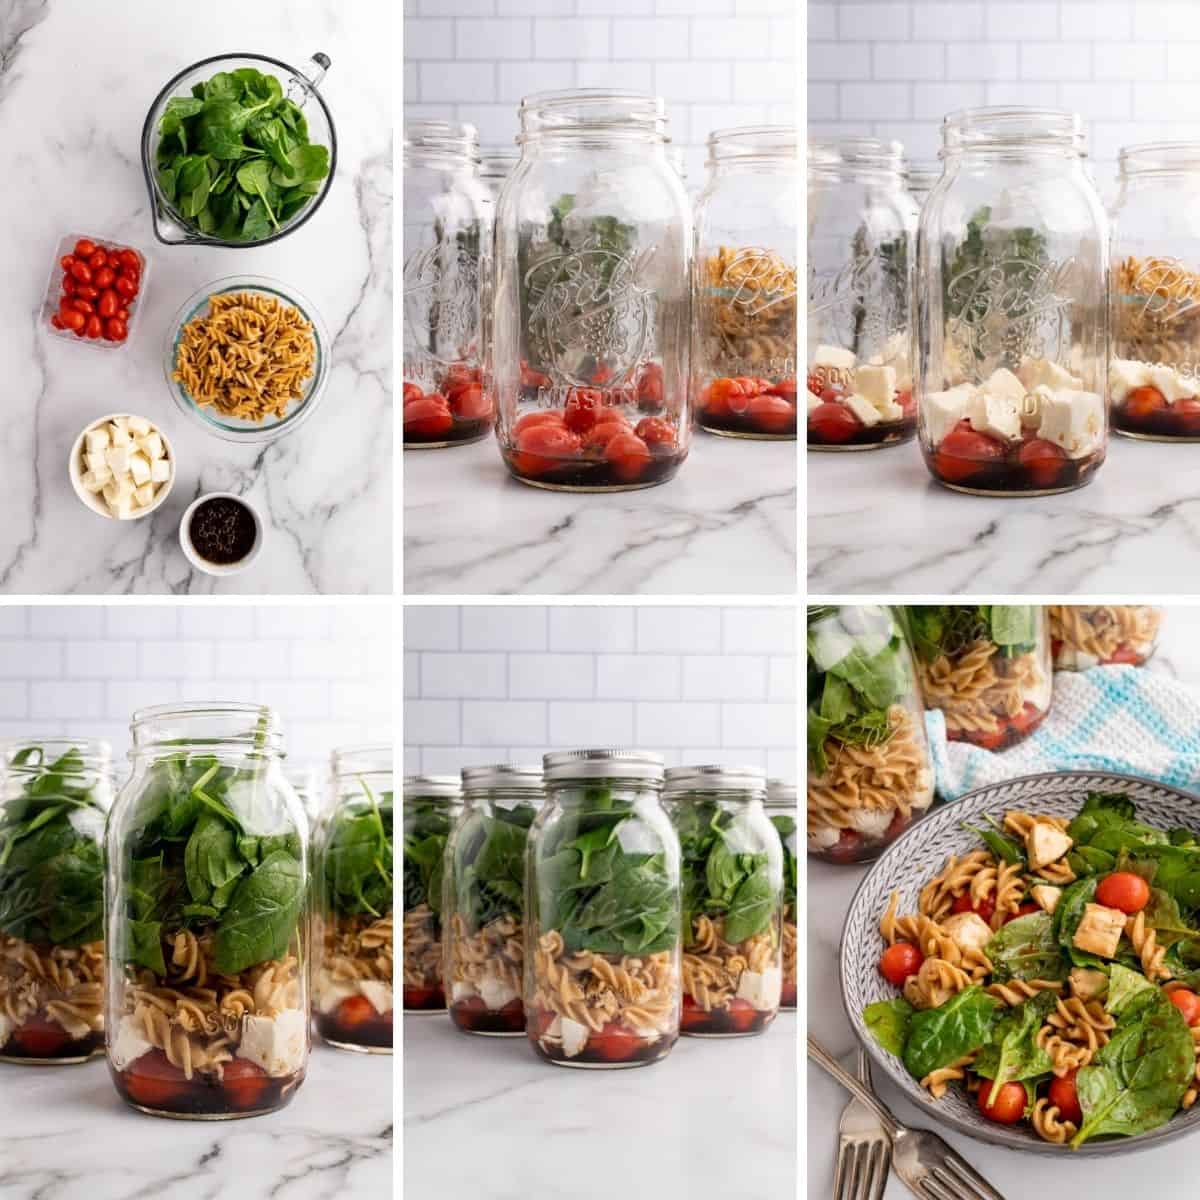 step by step collage showing how to make spinach salad with pasta and tomatoes.